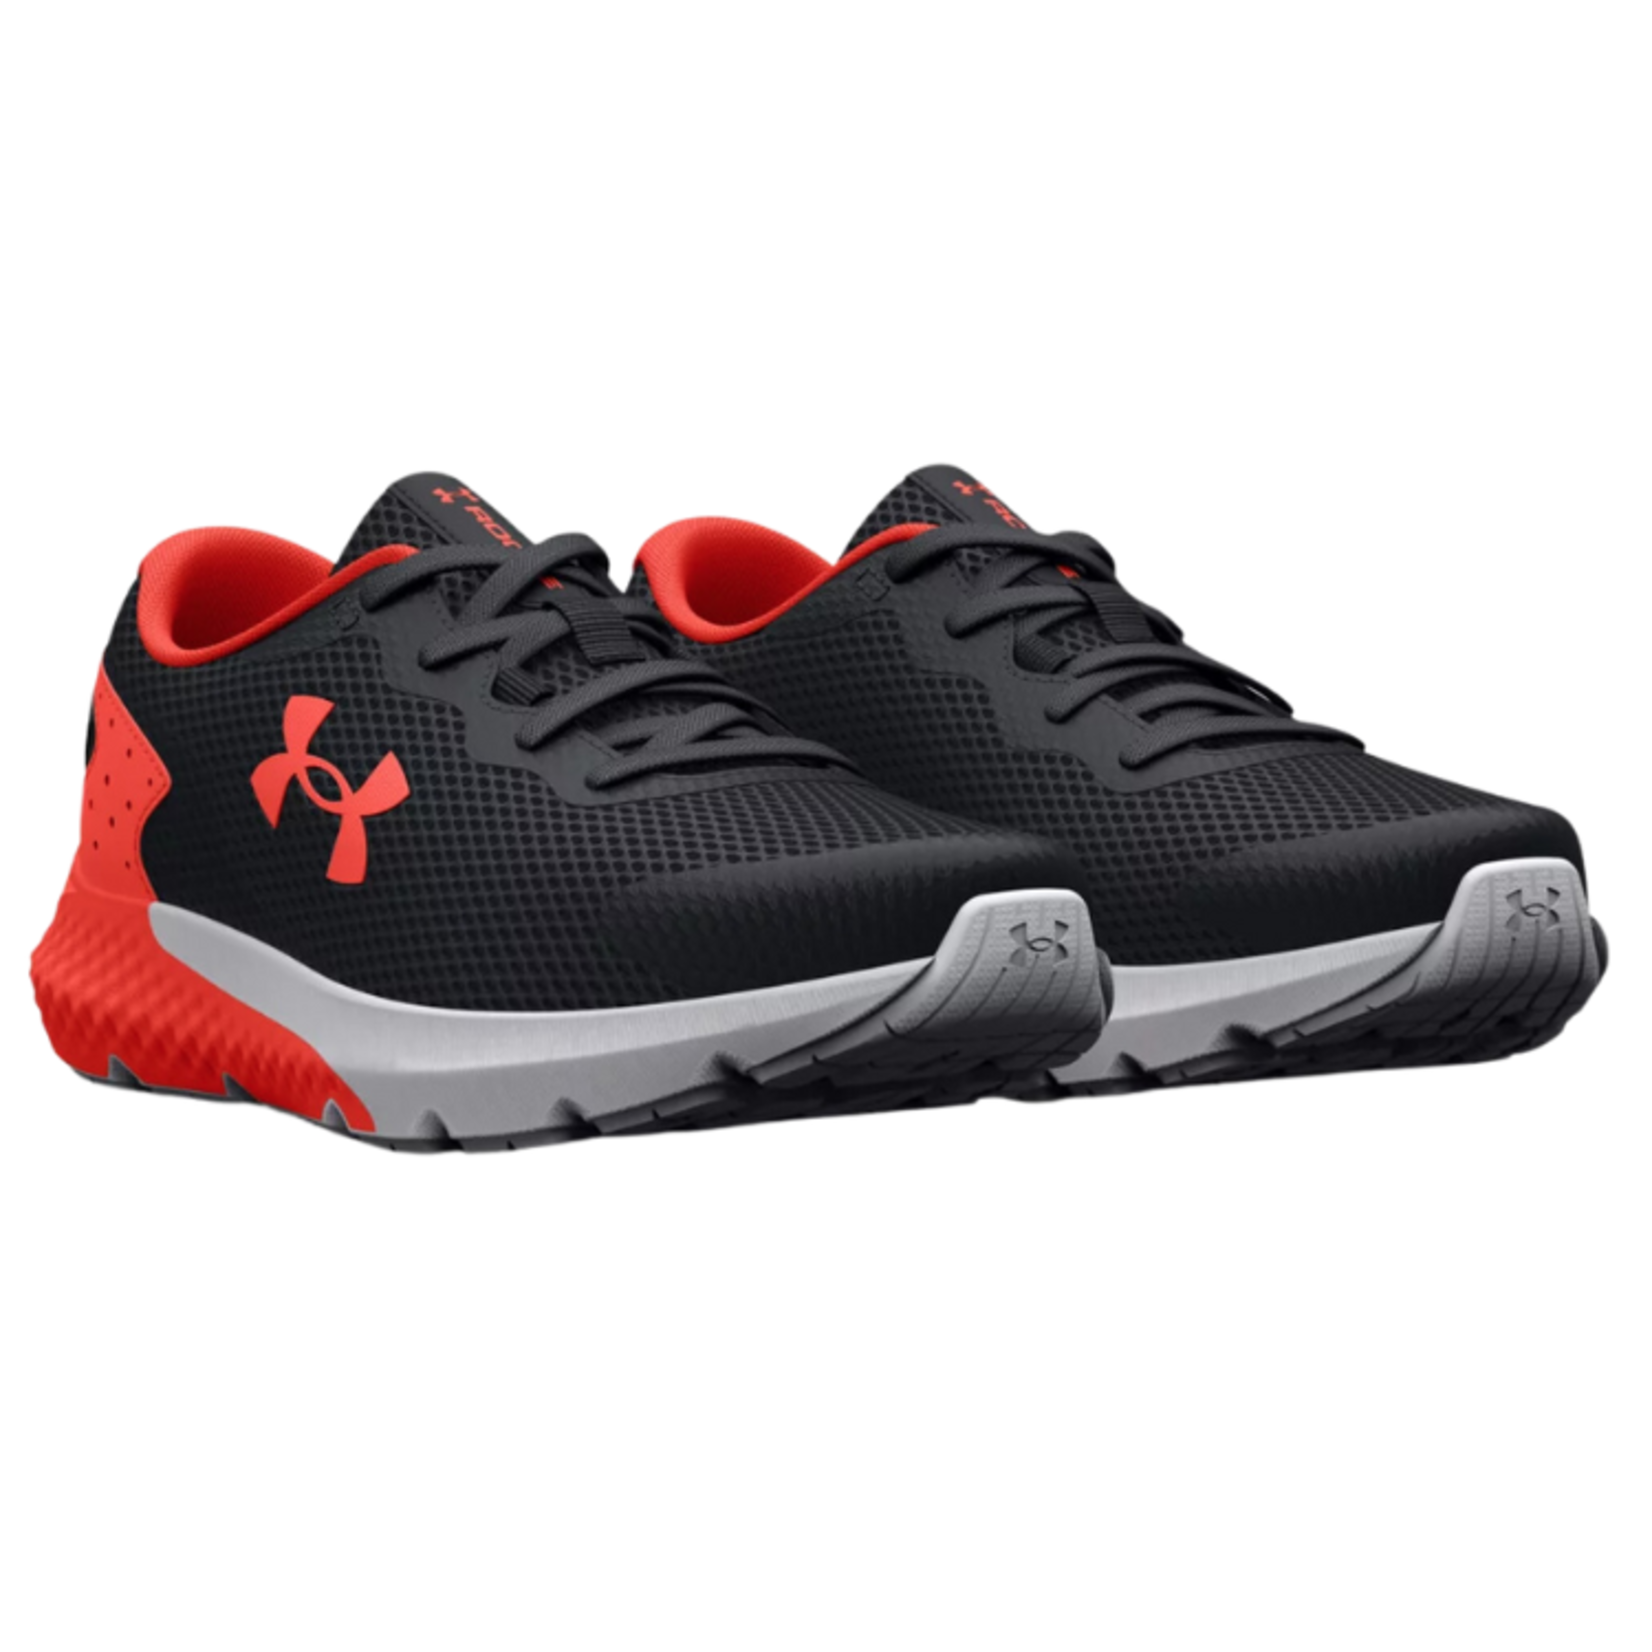 Under Armour Under Armour Running Shoes, Rogue 3 AL, BPS, Boys